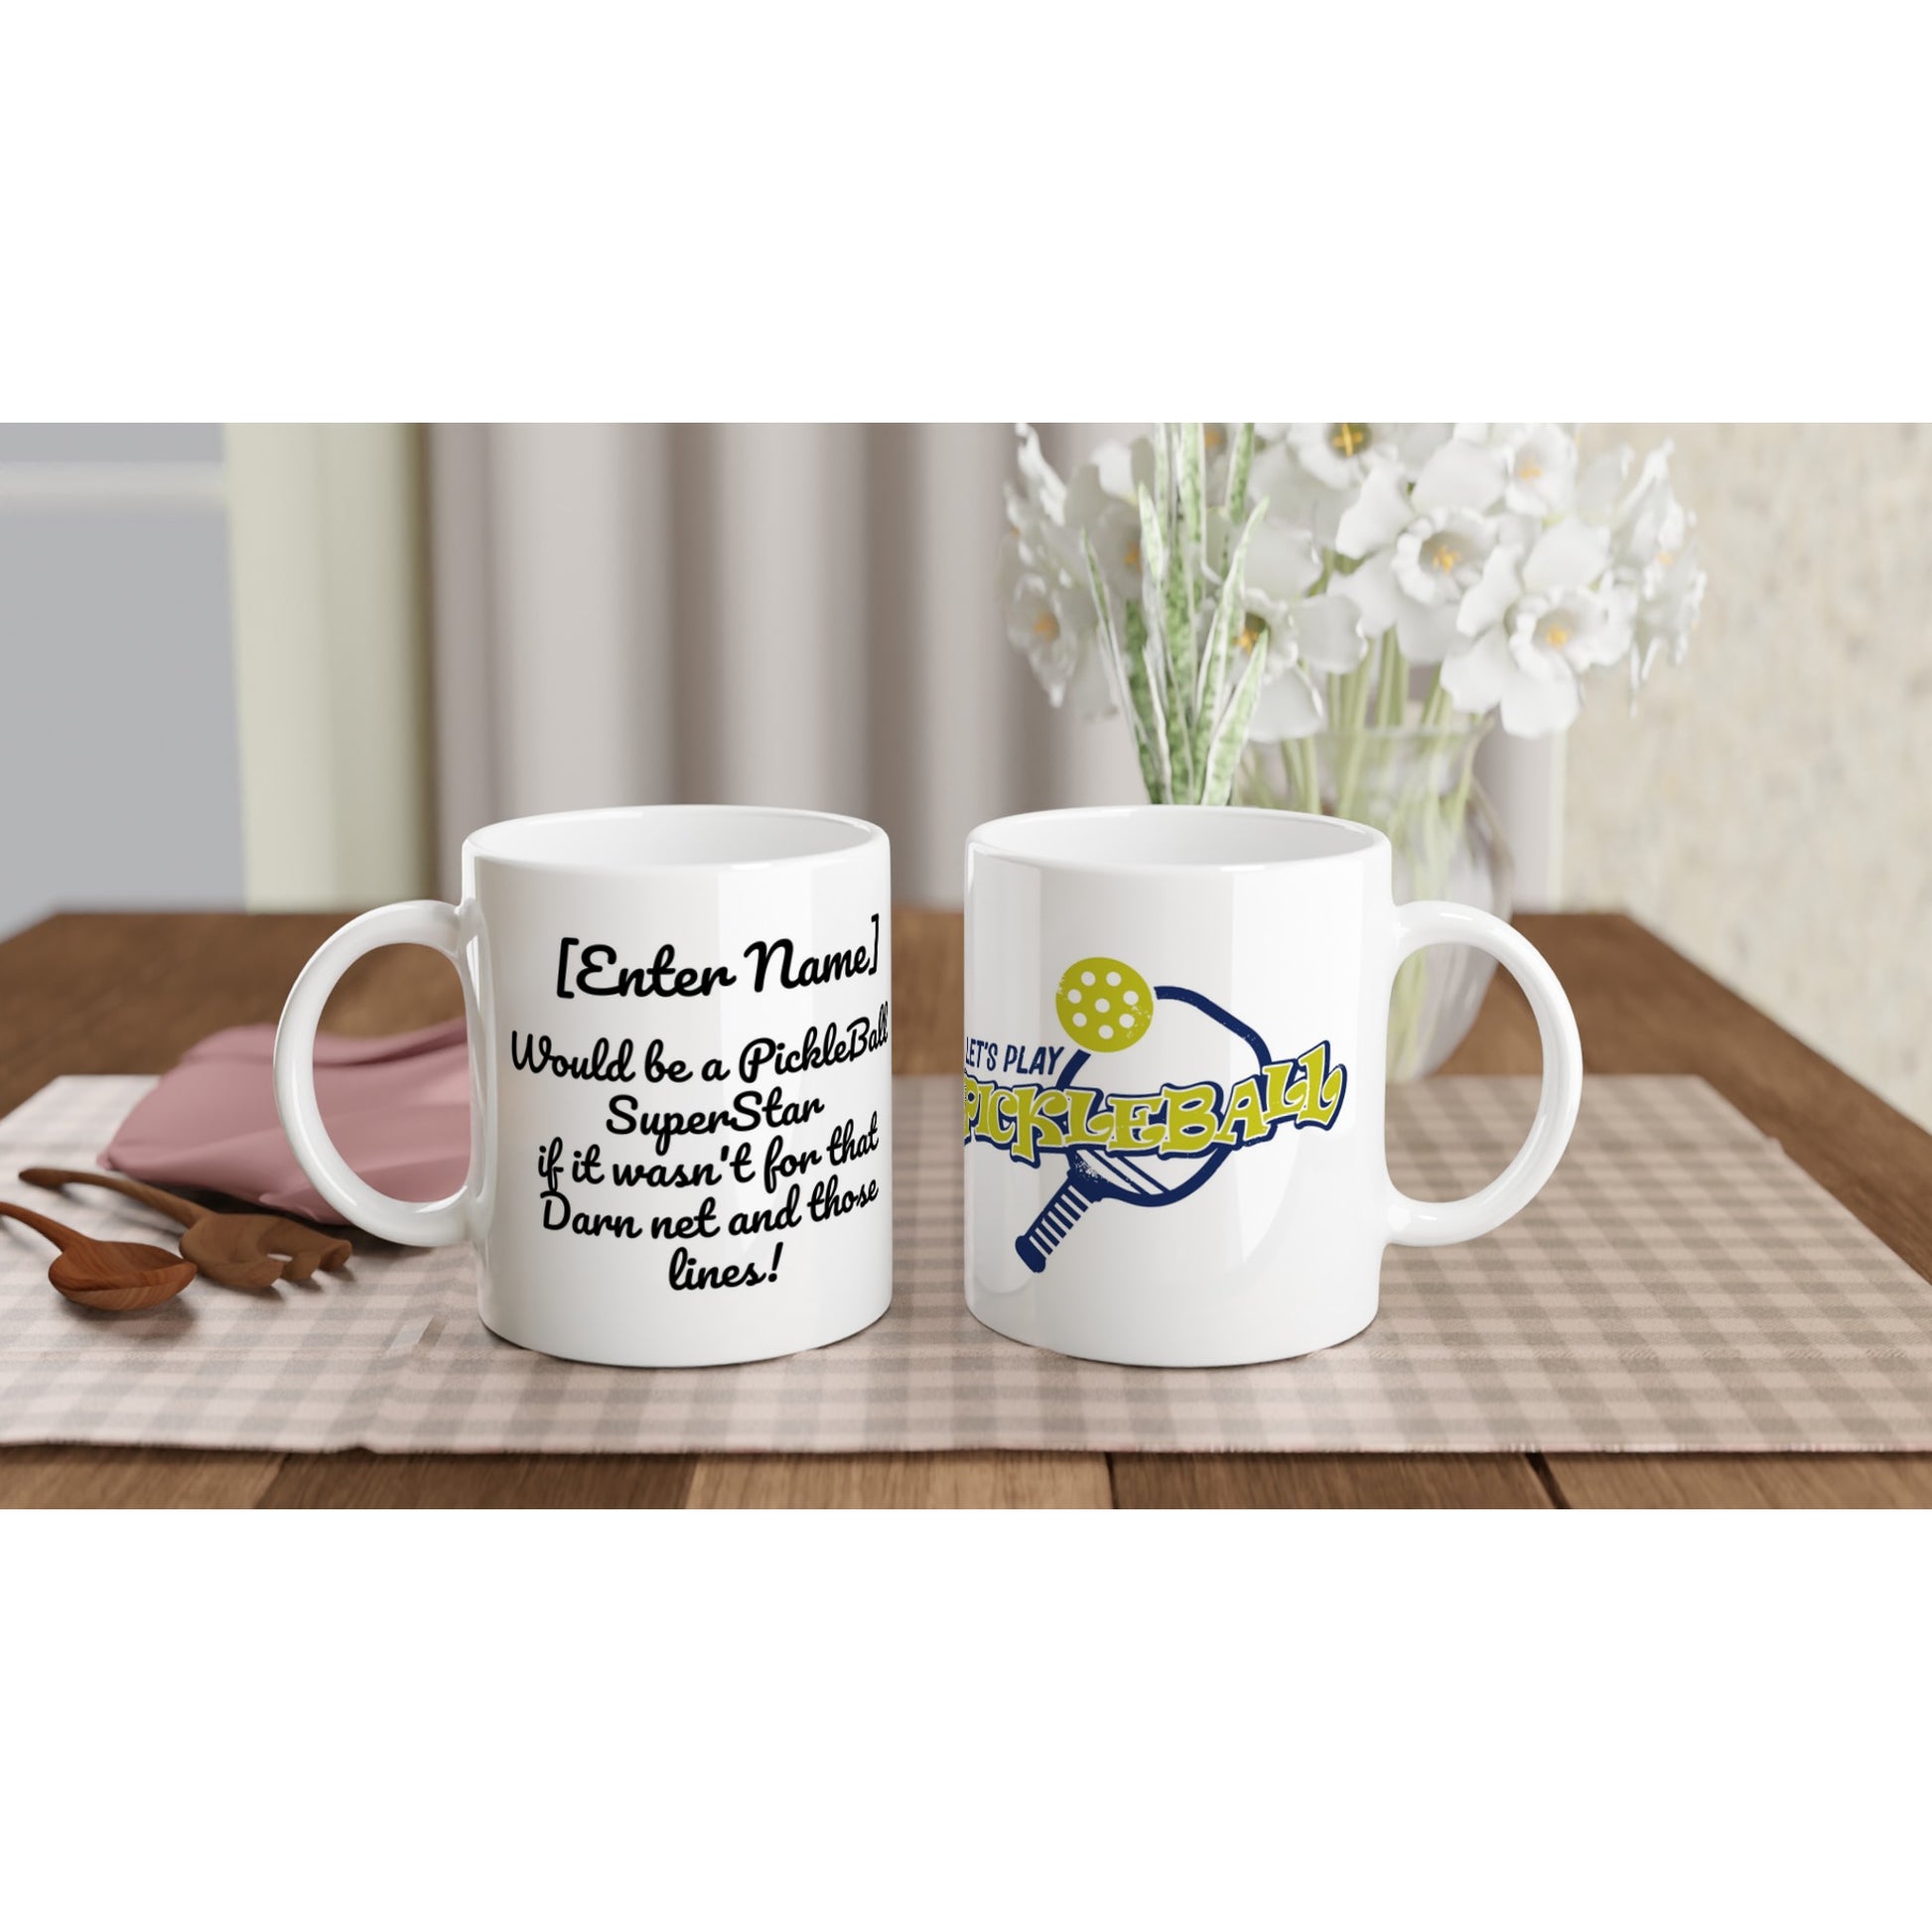 Two Personalized white ceramic 11oz mugs with motto Your Name Would be a PickleBall Superstar if it wasn’t for that Darn net and those lines on front and Let's Play PickleBall logo on back coffee mugs are dishwasher and microwave safe from WhatYa Say Apparel sitting on coffee table with green and white placemat.